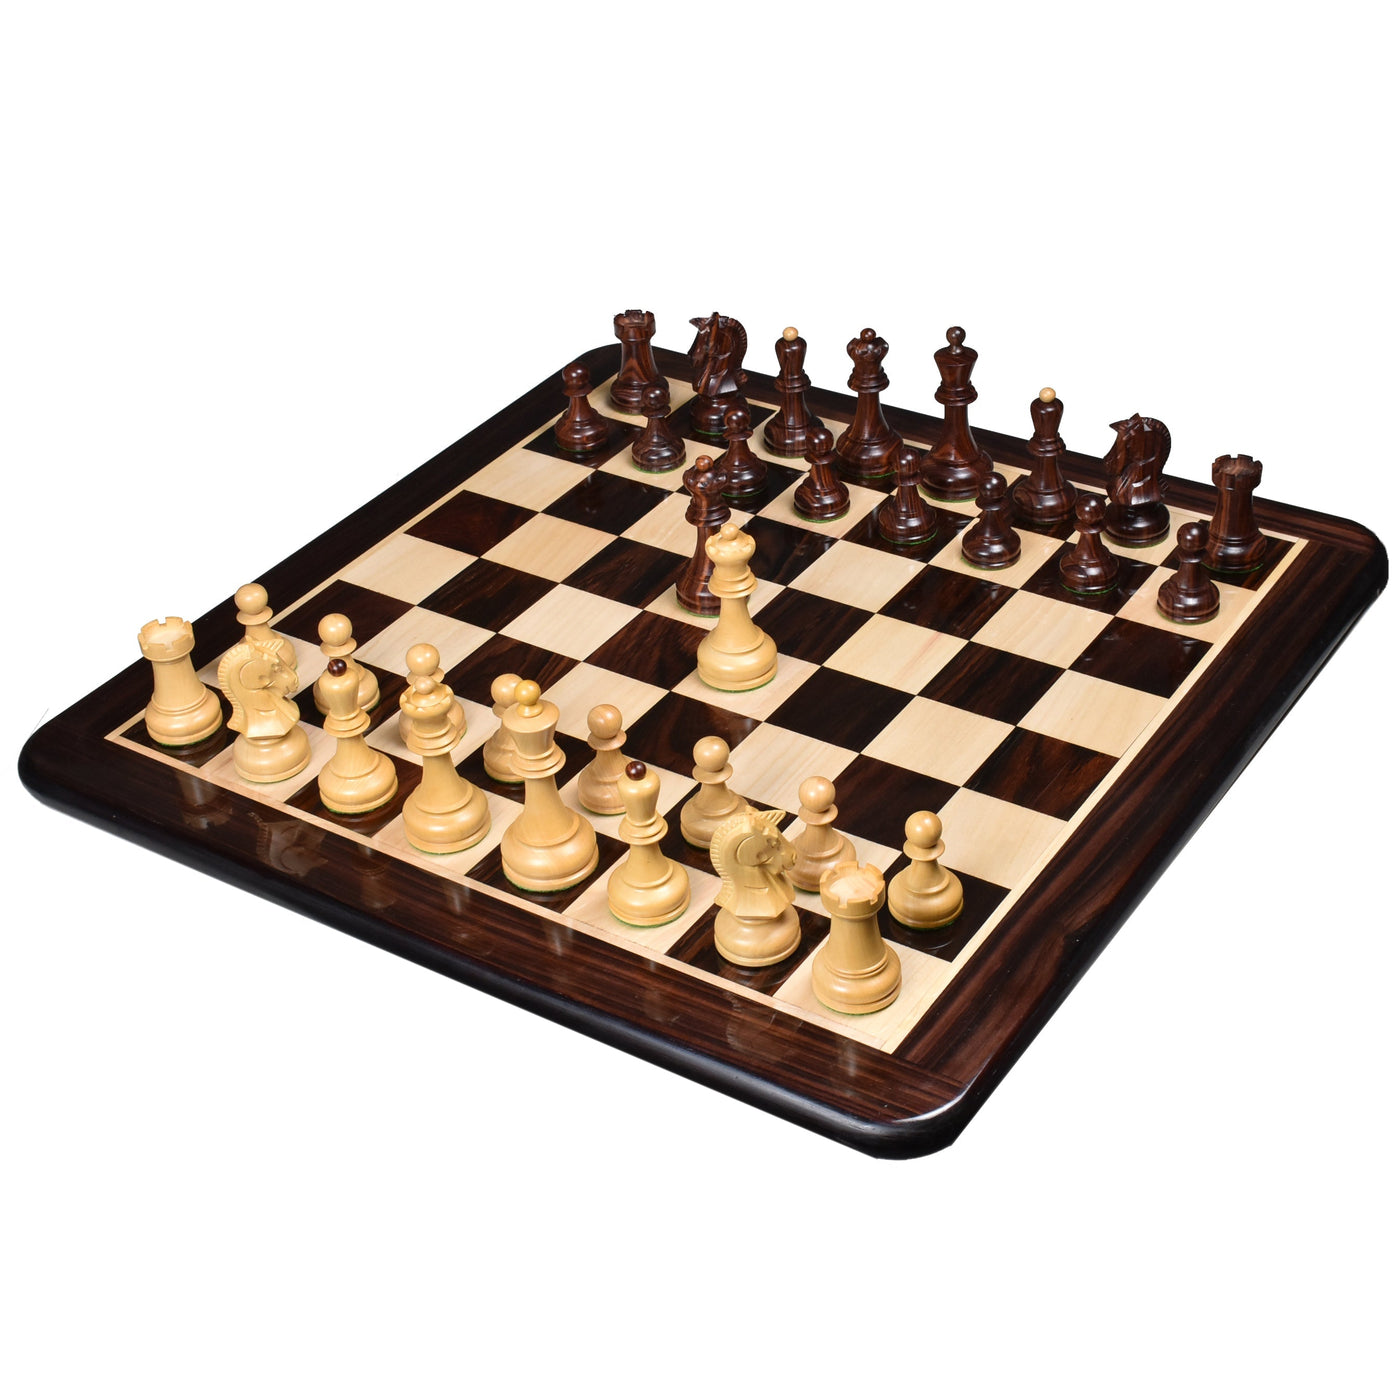 1970s' Dubrovnik Chess Pieces Only Set | Wooden Chess Pieces | Chess Pieces Only